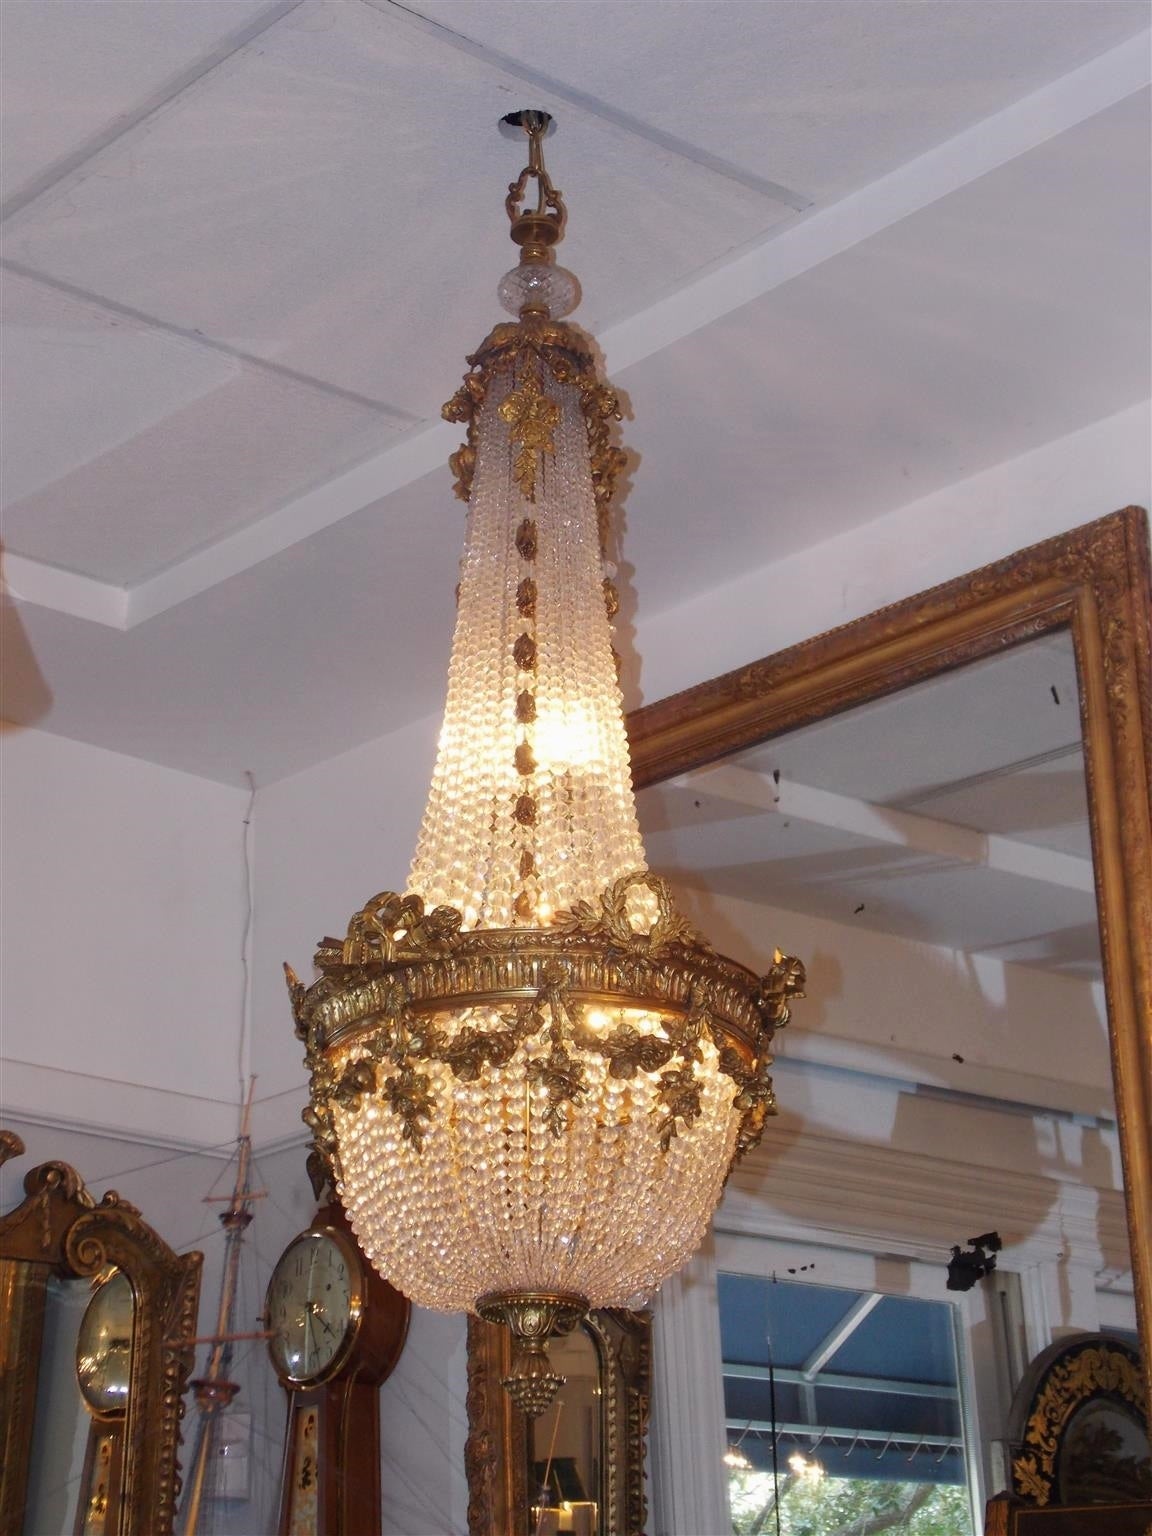 French gilt bronze and crystal eight light basket chandelier with decorative gilt floral swags, laurel wreath, graduated cascading bell flowers, and terminating with an artichoke finial.  Early 19th Century.  Originally candle powered and has been